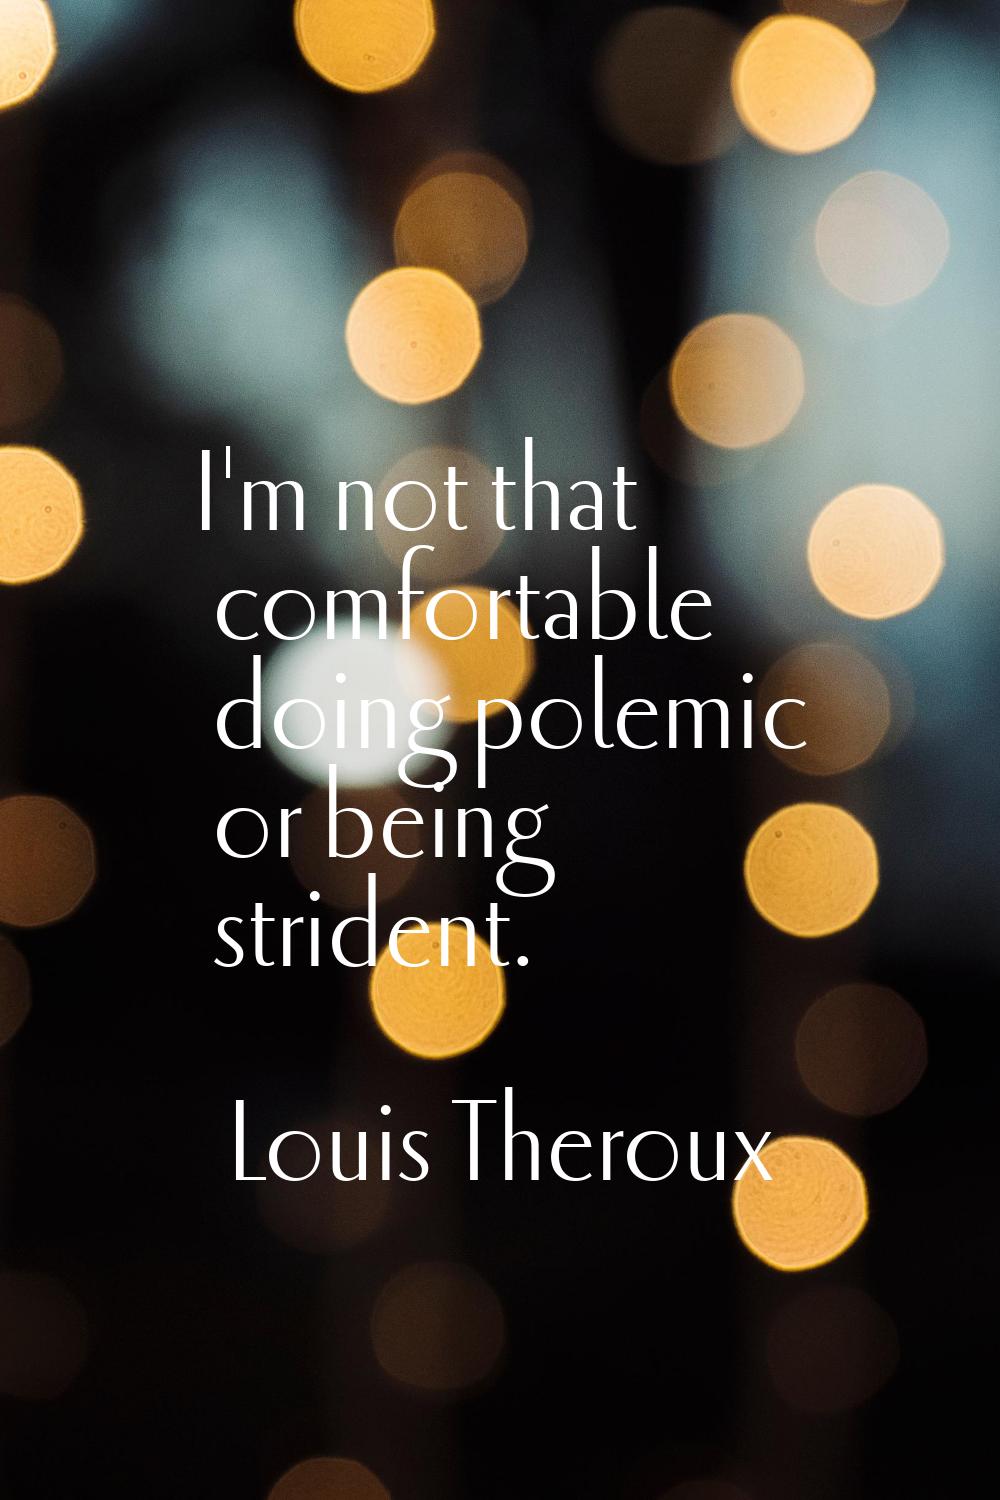 I'm not that comfortable doing polemic or being strident.